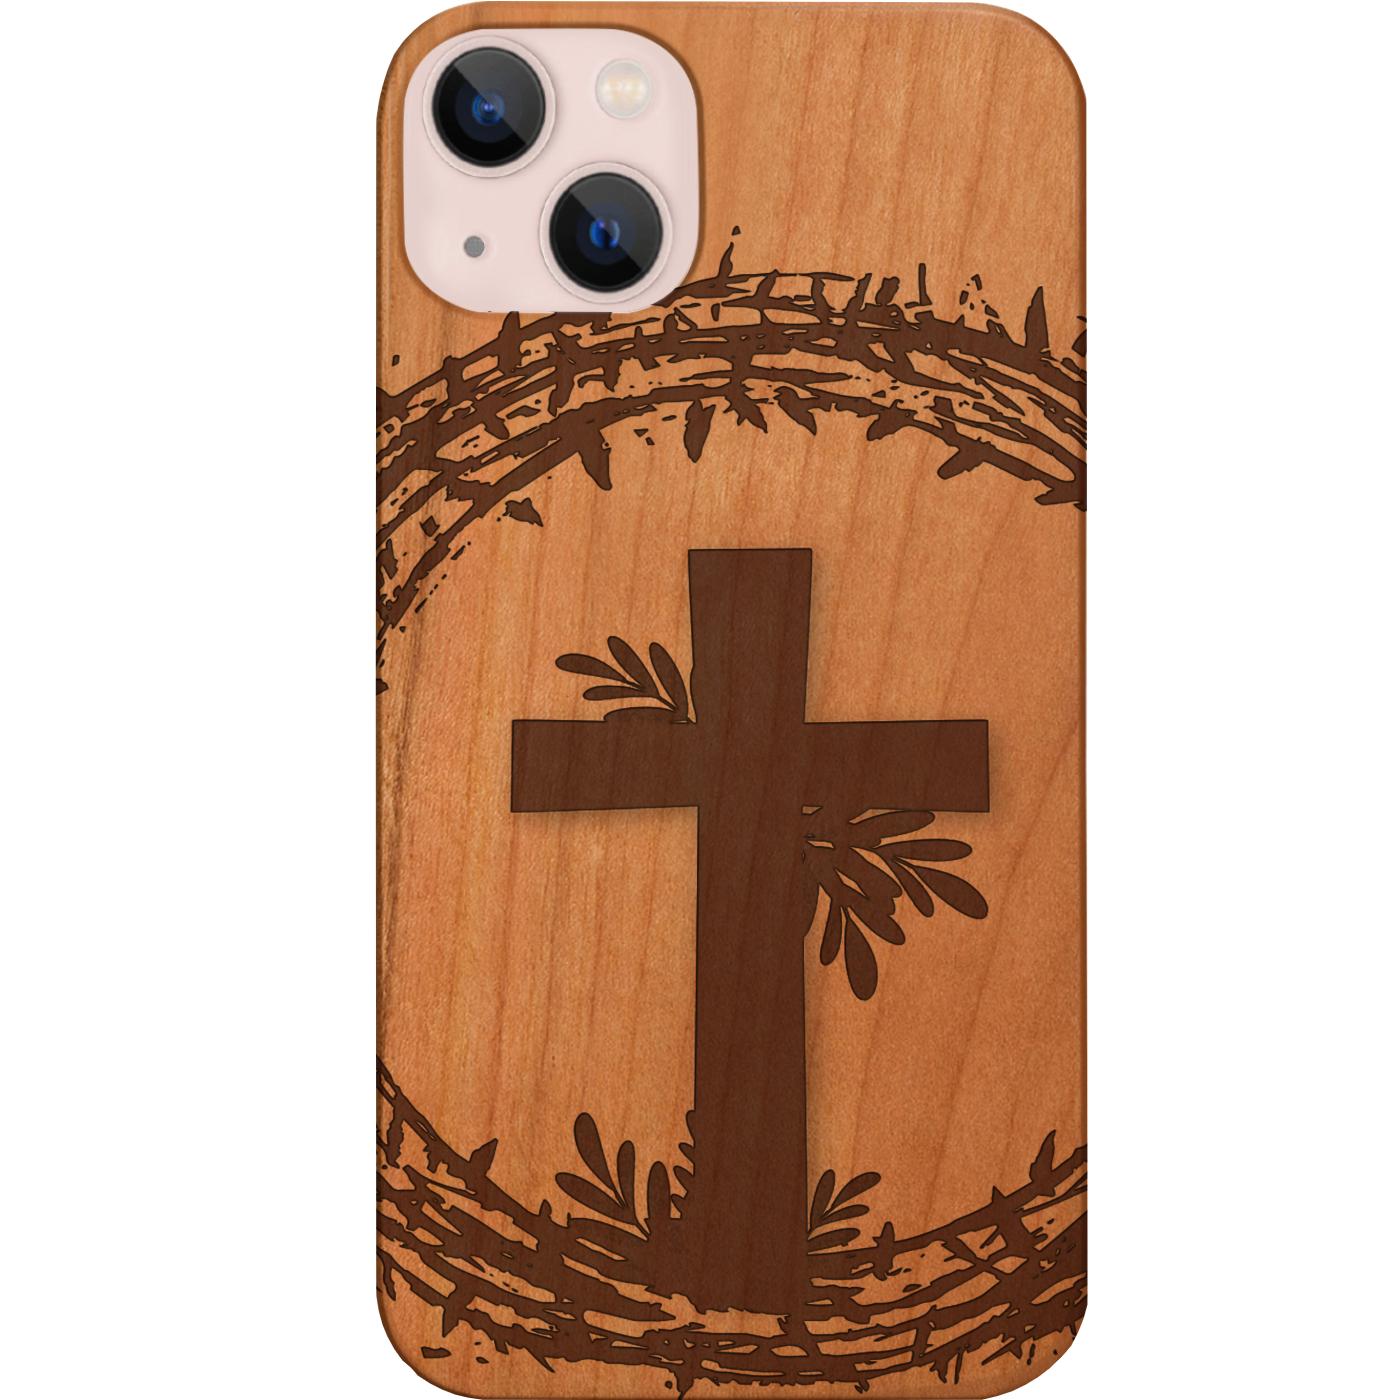 Crucified 2 - Engraved Phone Case